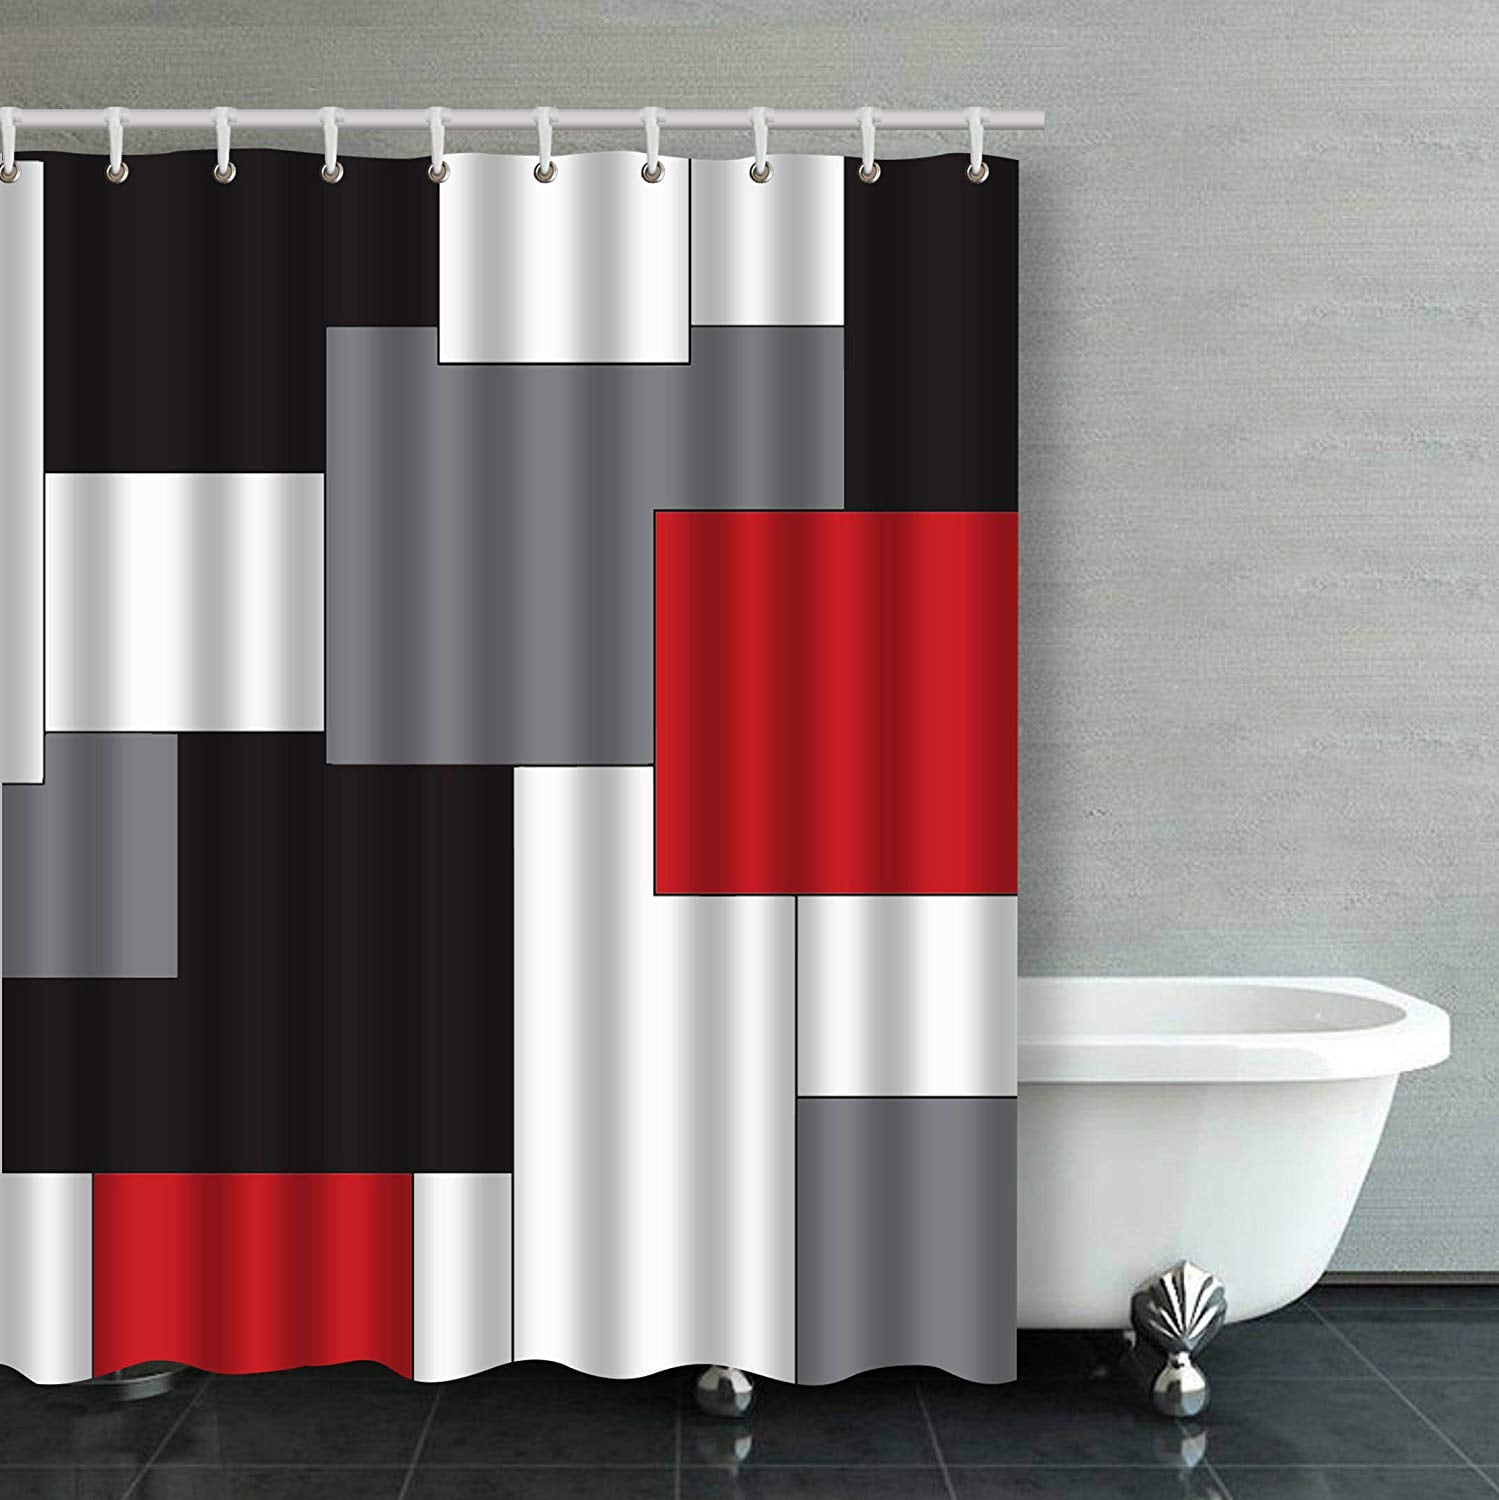 Red Anchor Black and White Stripes Shower Curtain Set Bathroom Waterproof Fabric 